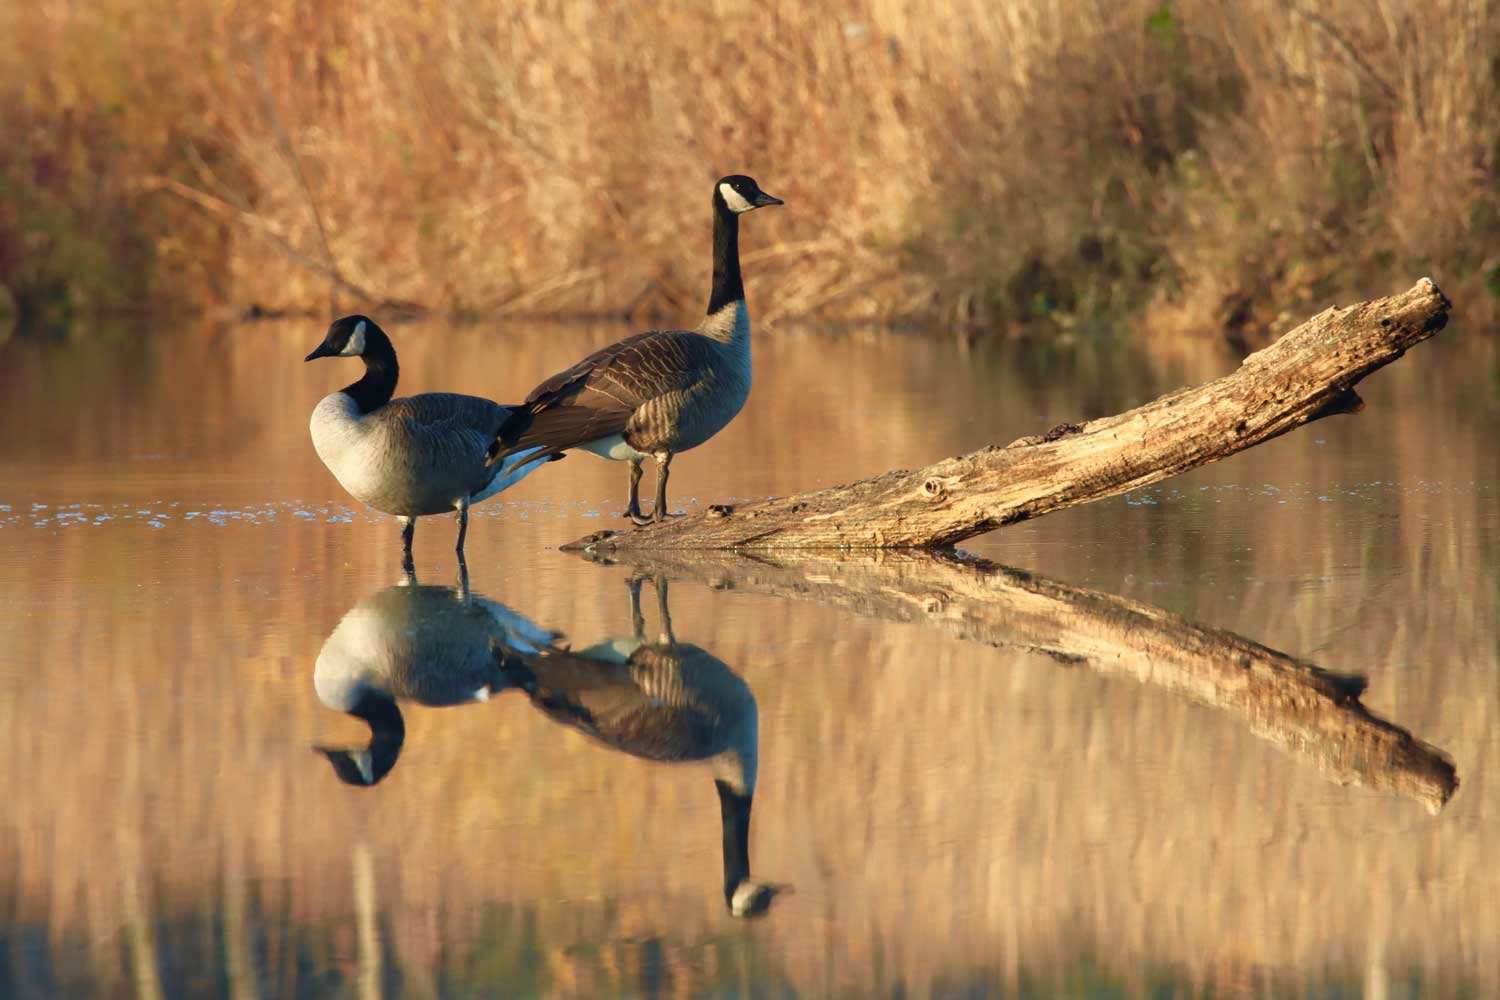 Two Canada geese standing in shallow water of a pond next to a fallen tree branch with dried grasses in the background.